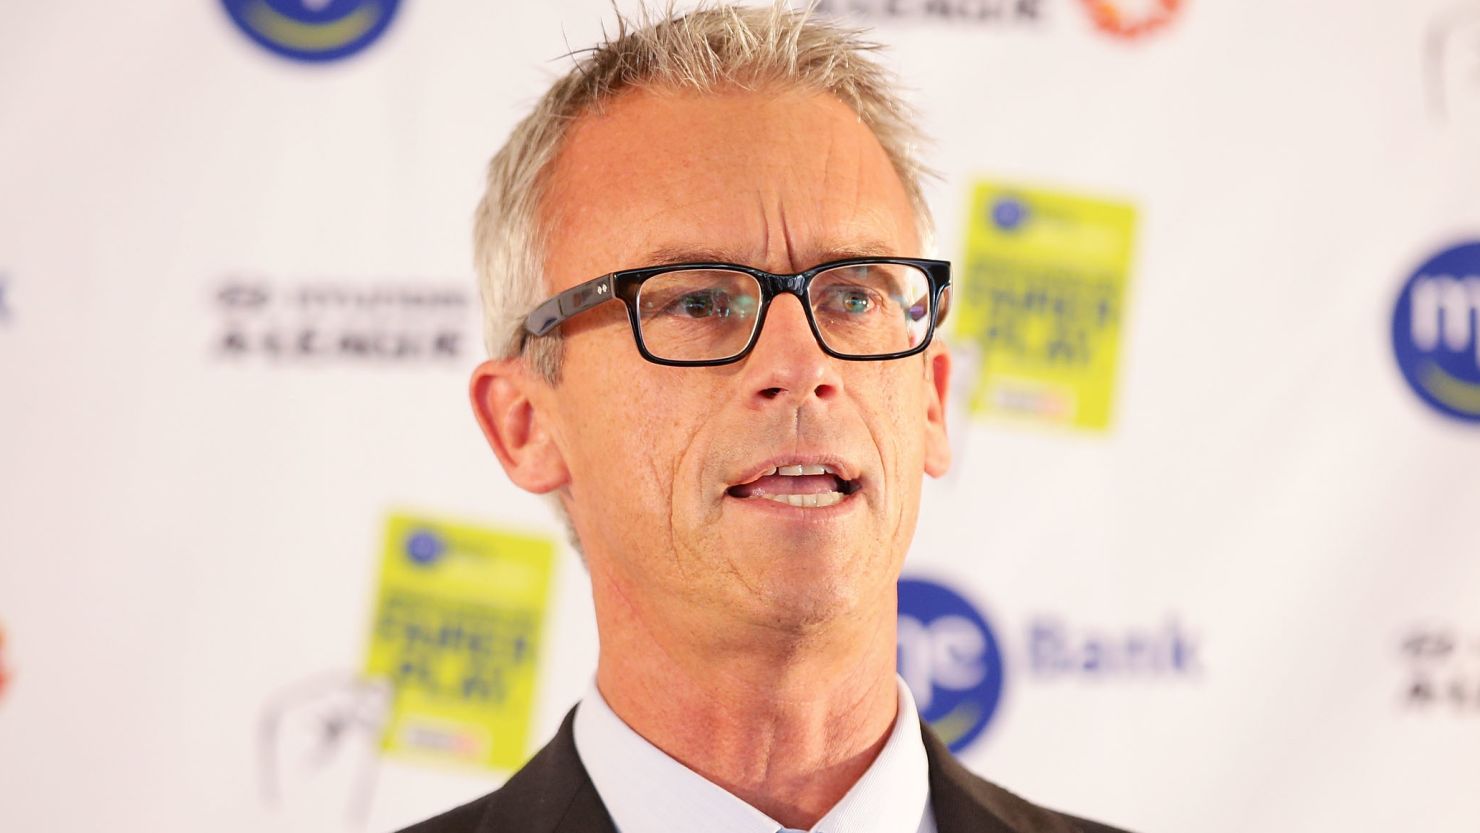 Australian Football Federation chief executive David Gallop promised to take strong action following the match-fixing arrests.